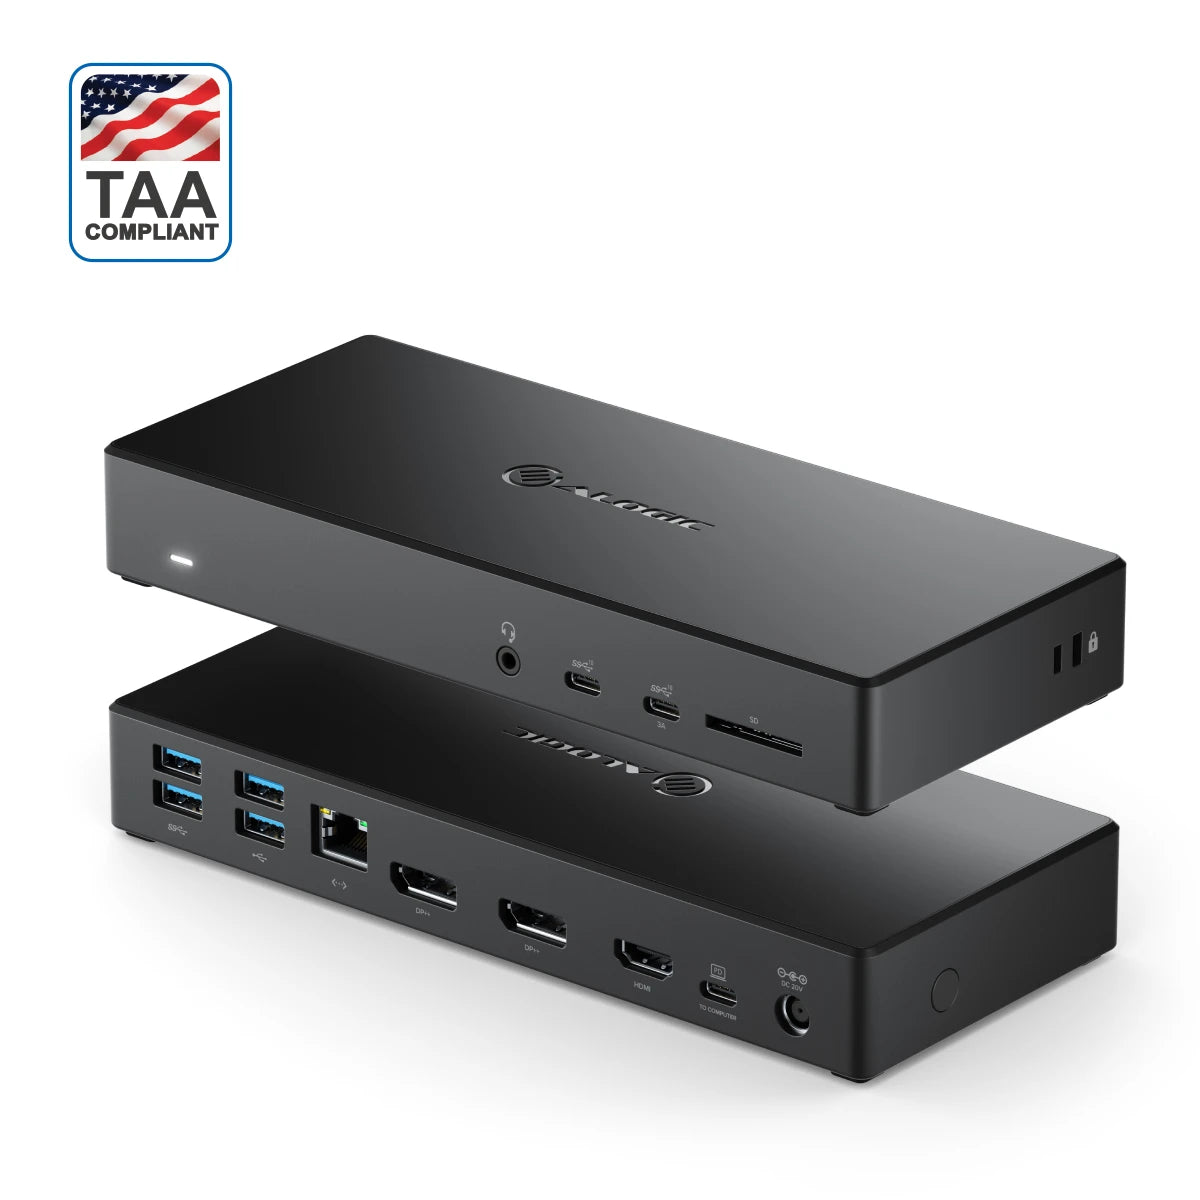 USB-C Triple Display DP Alt. Mode Docking Station - MA3 with 100W Power Delivery (Laptop Charging) - 2 x DP and 1 x HDMI with up to 4K 60Hz Support